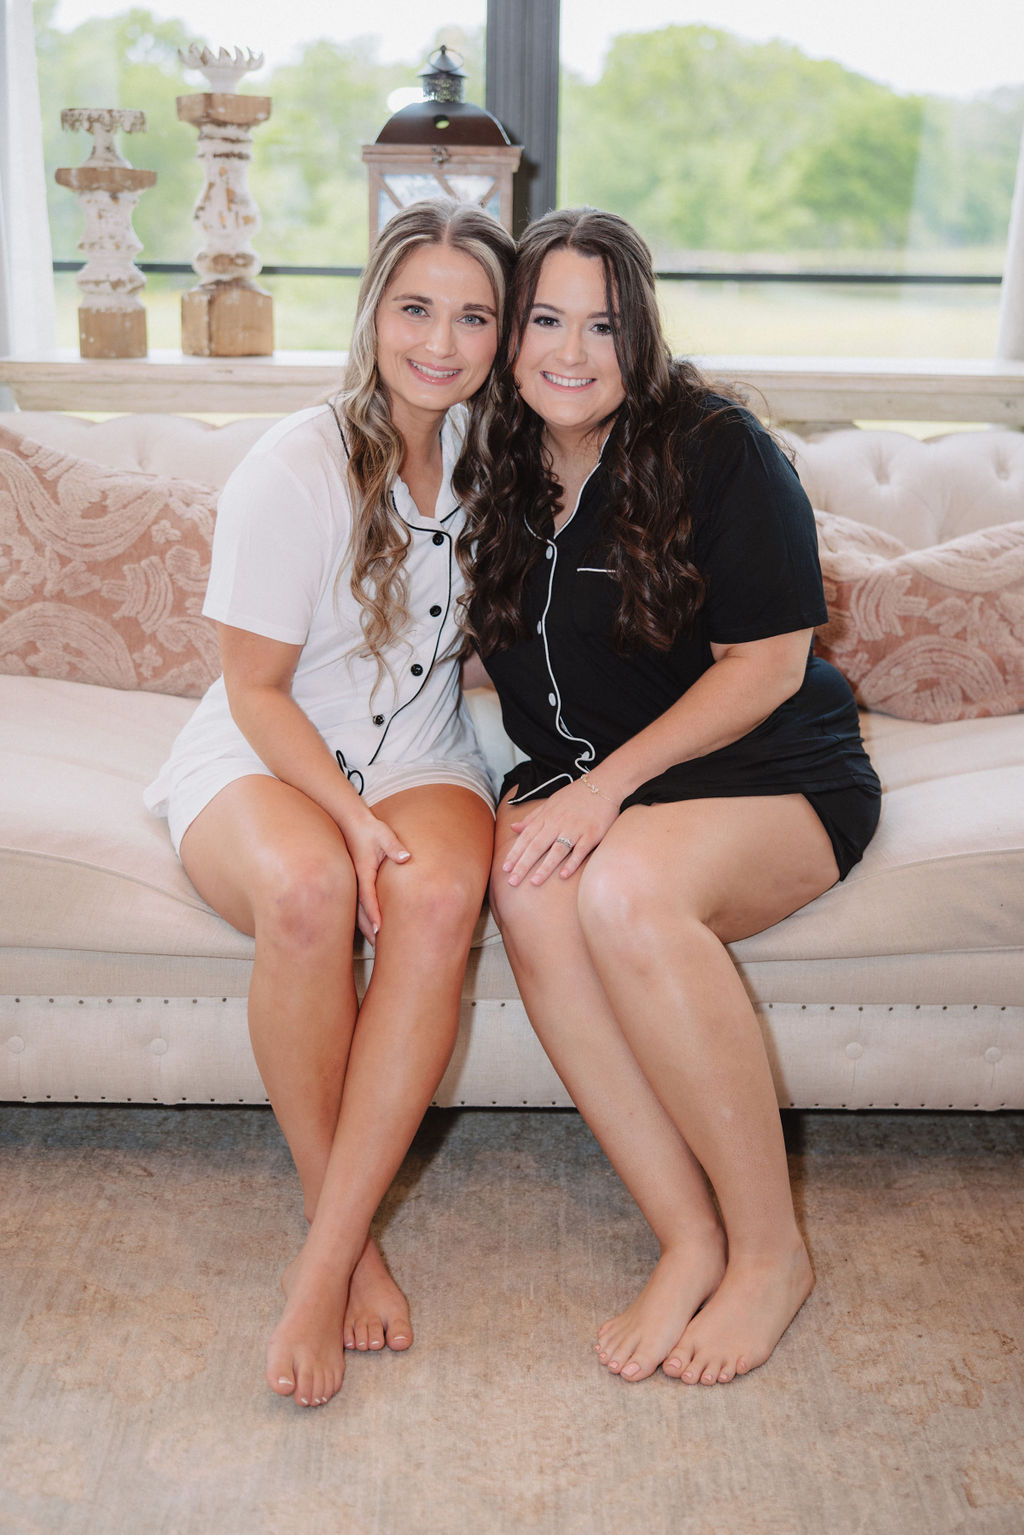 bridesmaid matching black outfits and one person in white sit on a couch, smiling and engaging in conversation at a wedding